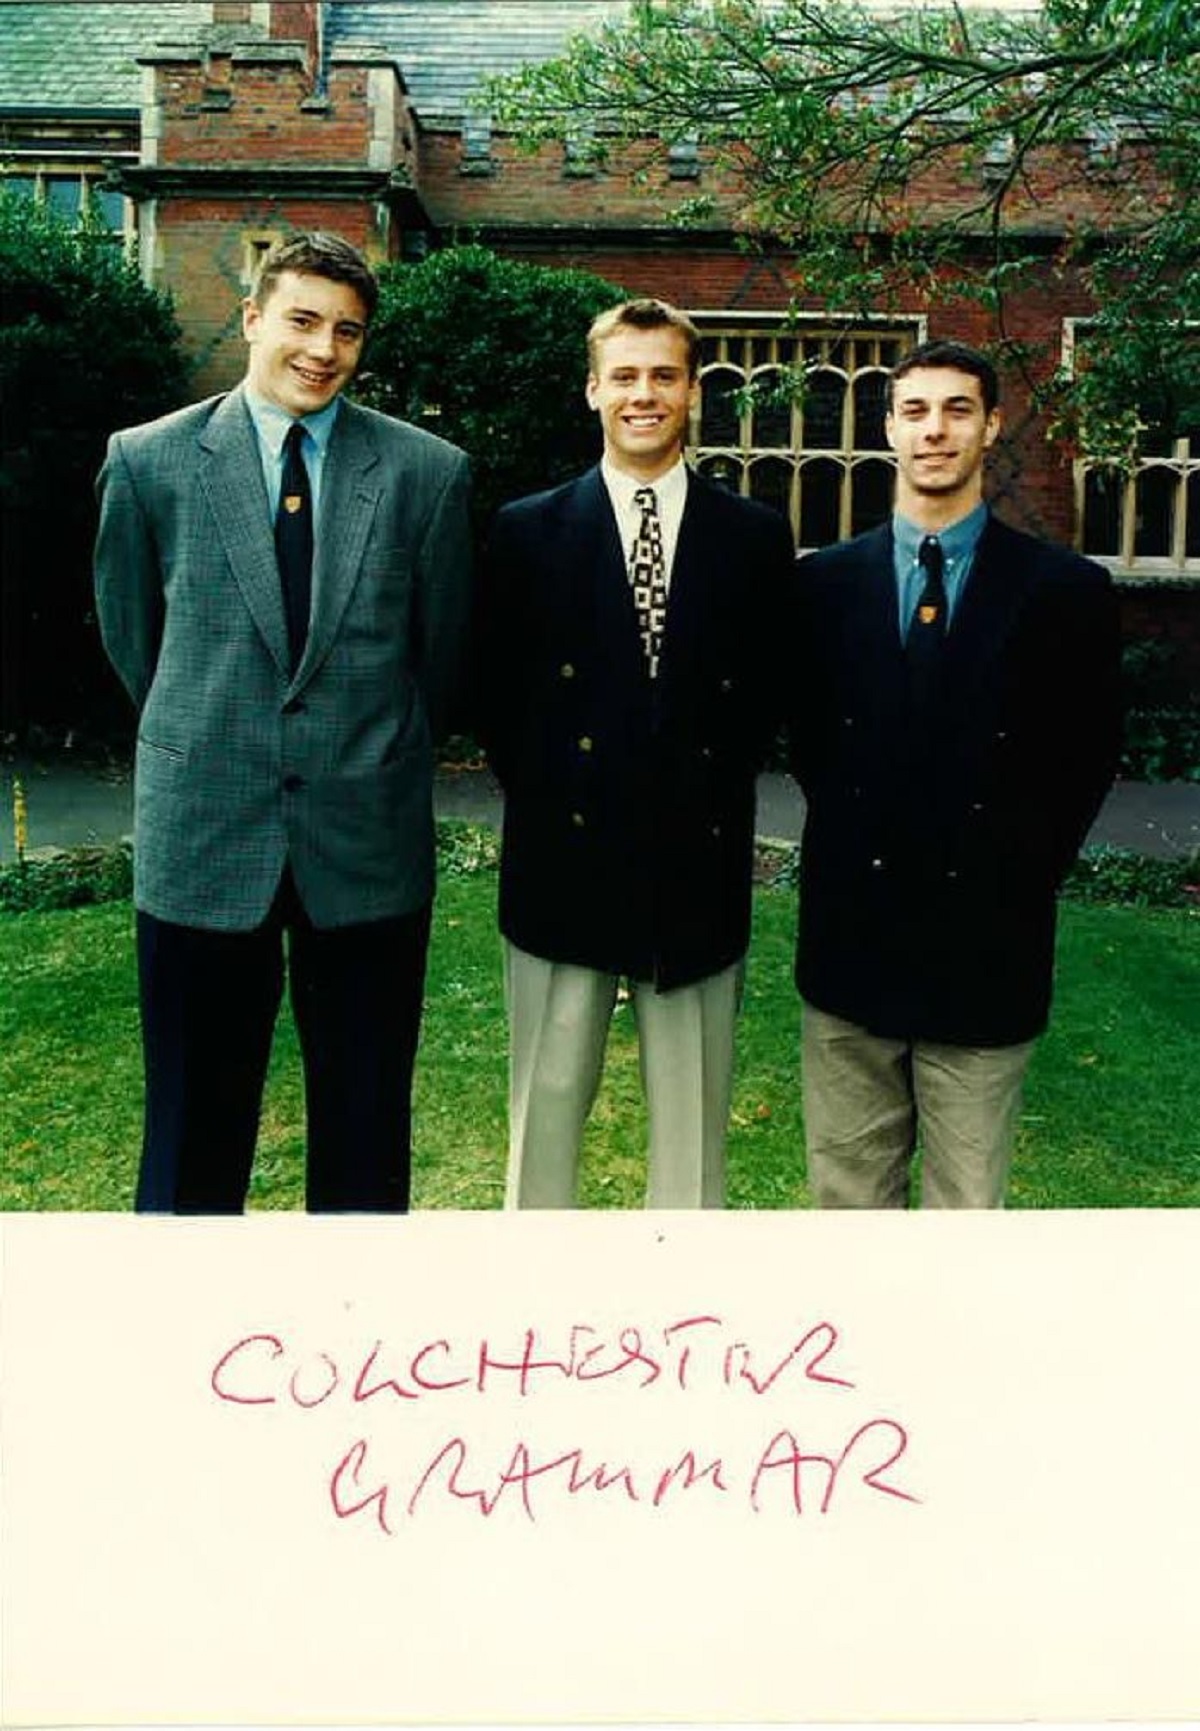 Former head boy Etienne Smith (centre) with deputy head boys Andy Hyland (left) and Ben Meyer - October 1998.